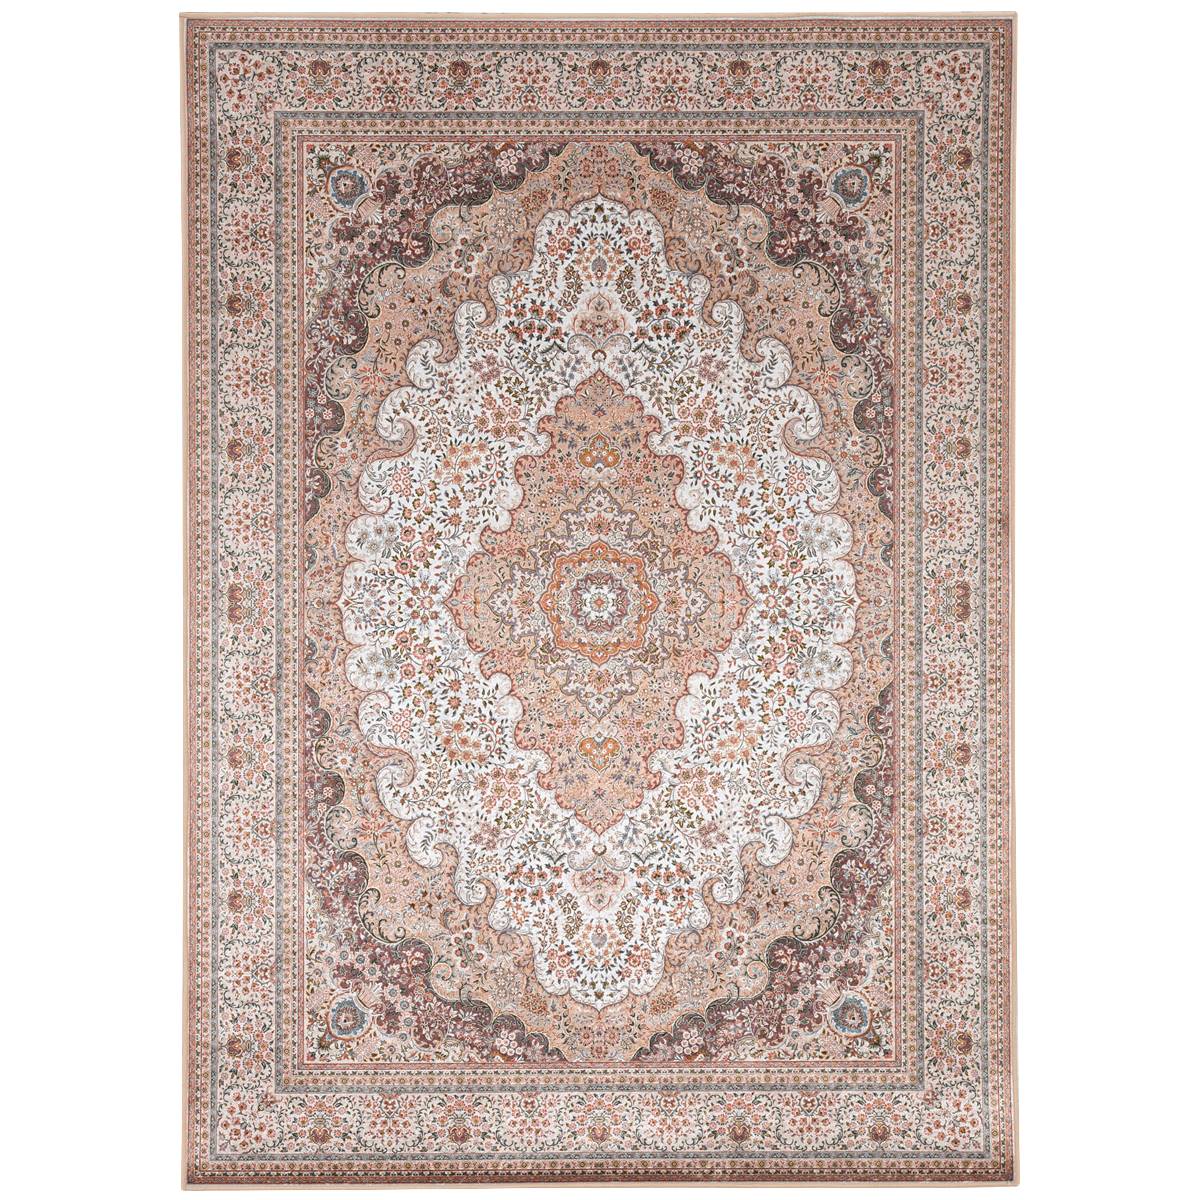 Linon Emerald Collection Ivory Detailed Rectangle Rug